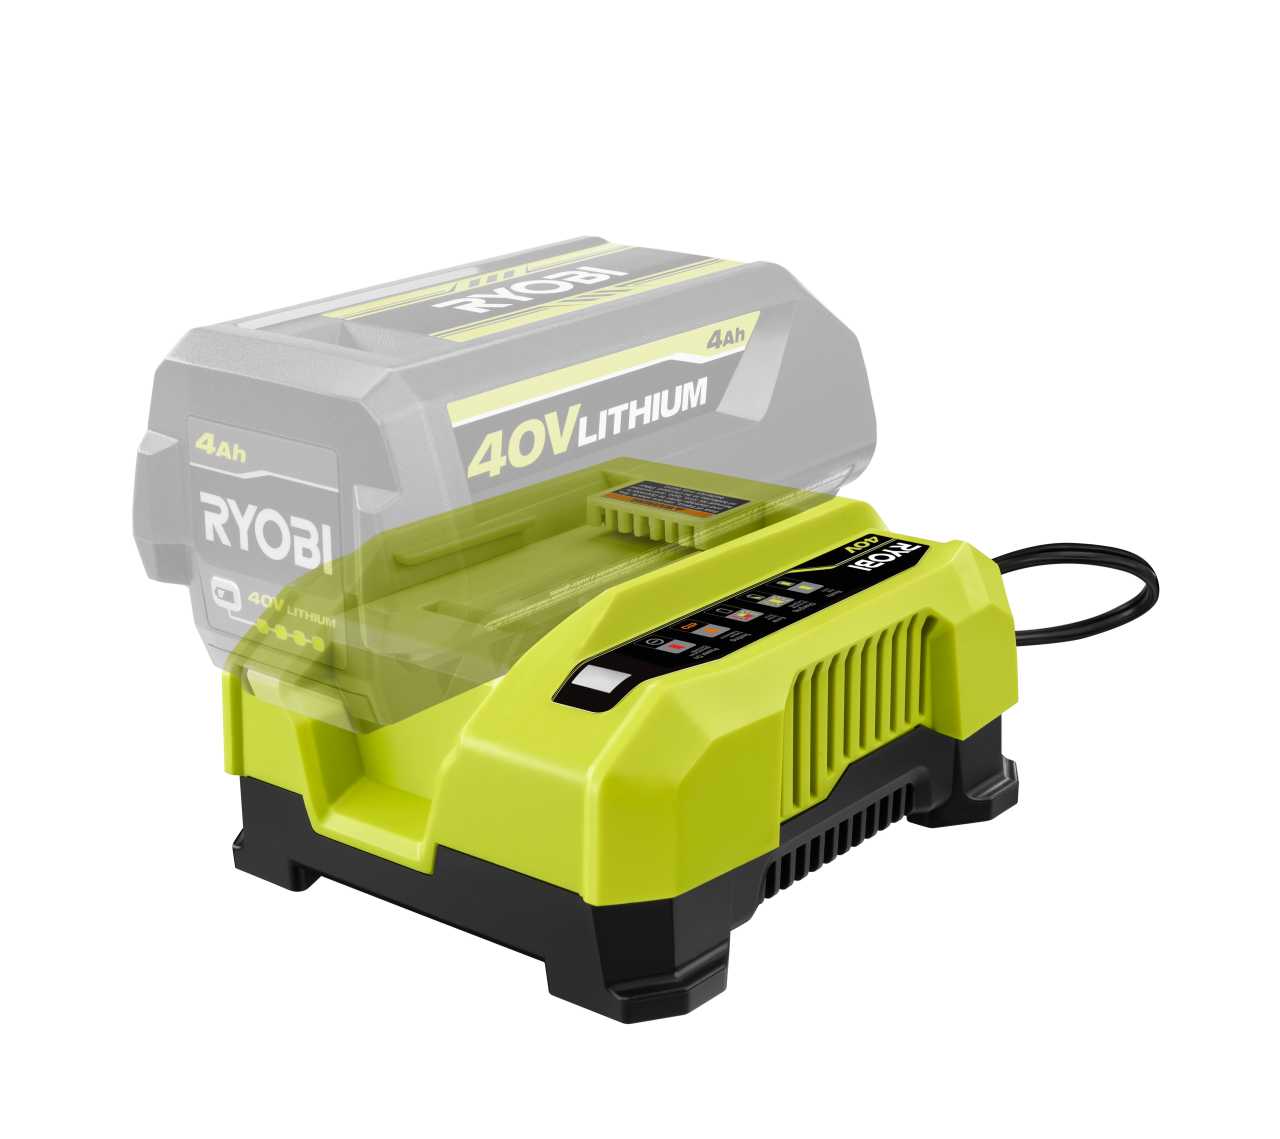 Product Features Image for 40V LITHIUM-ION 4.0AH BATTERY AND RAPID CHARGER.